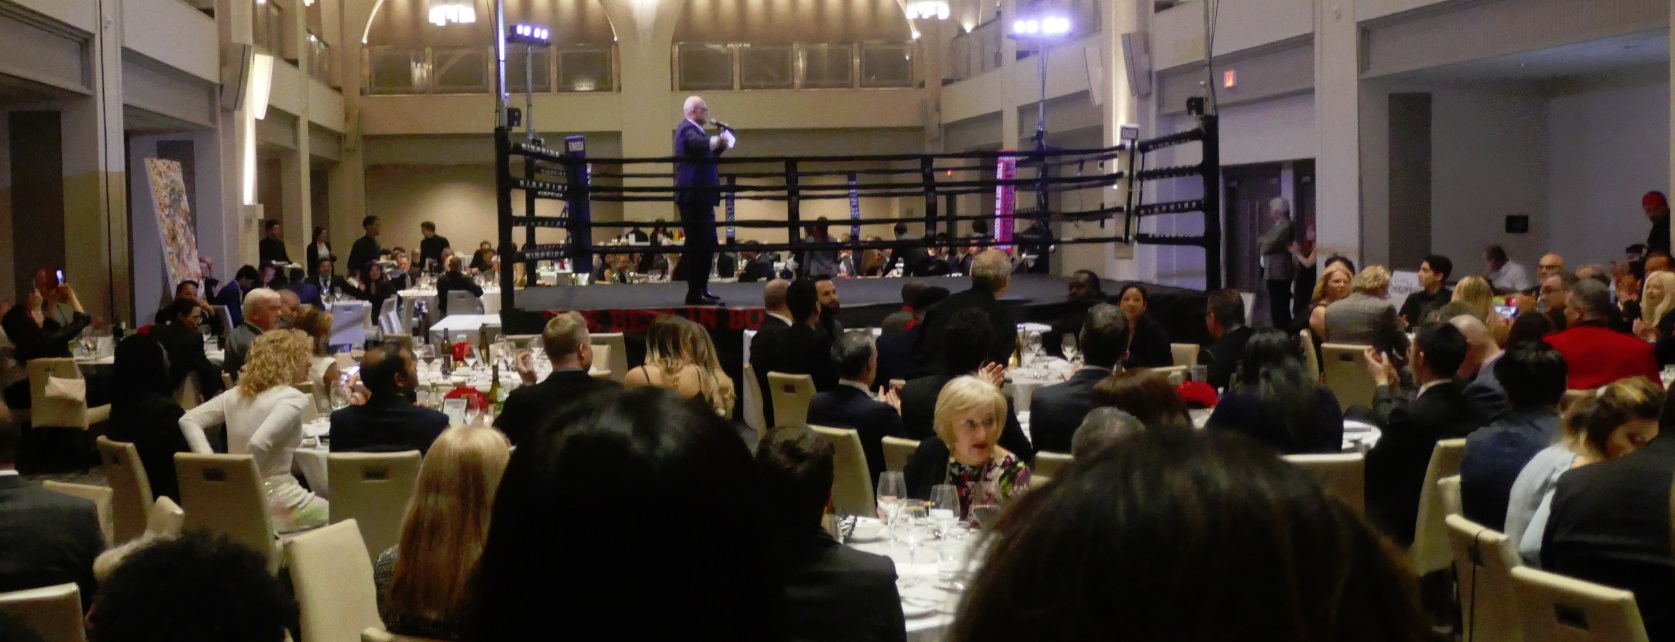 the fight night begins at Spider Jones - Fight for Youth - 18 April 2018, Arcadian Court